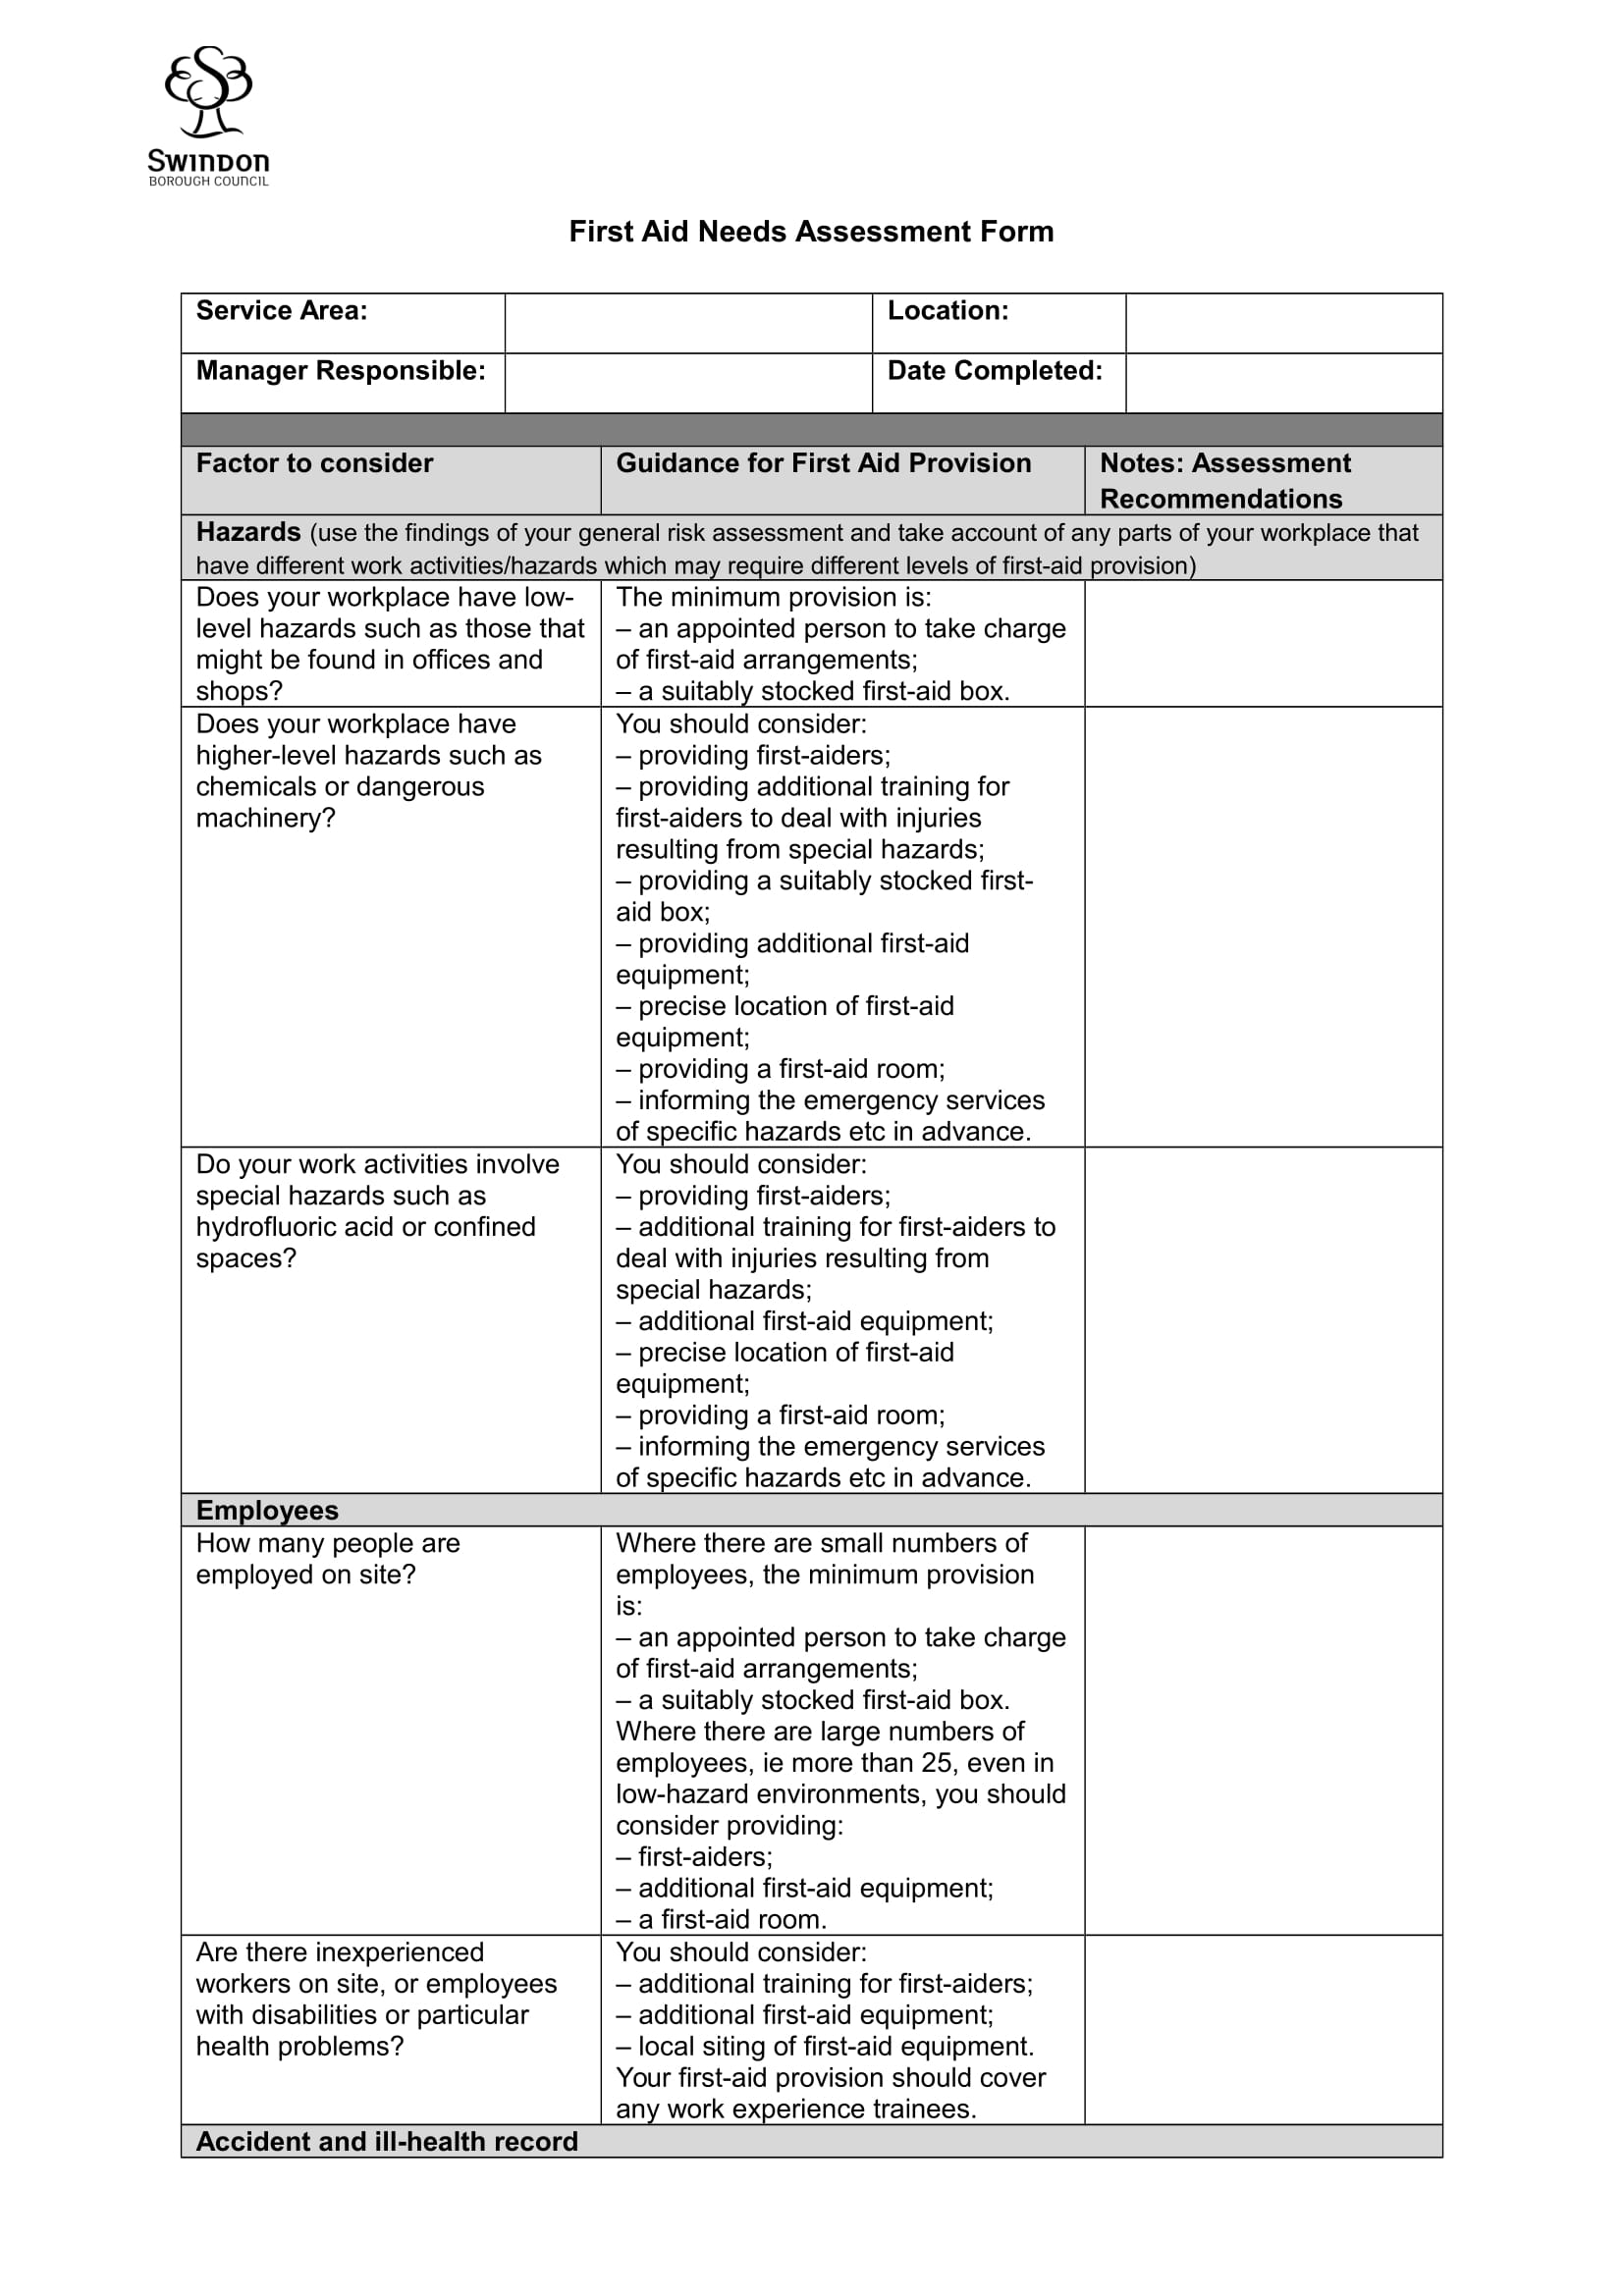 First Aid Needs Assessment Form 1 